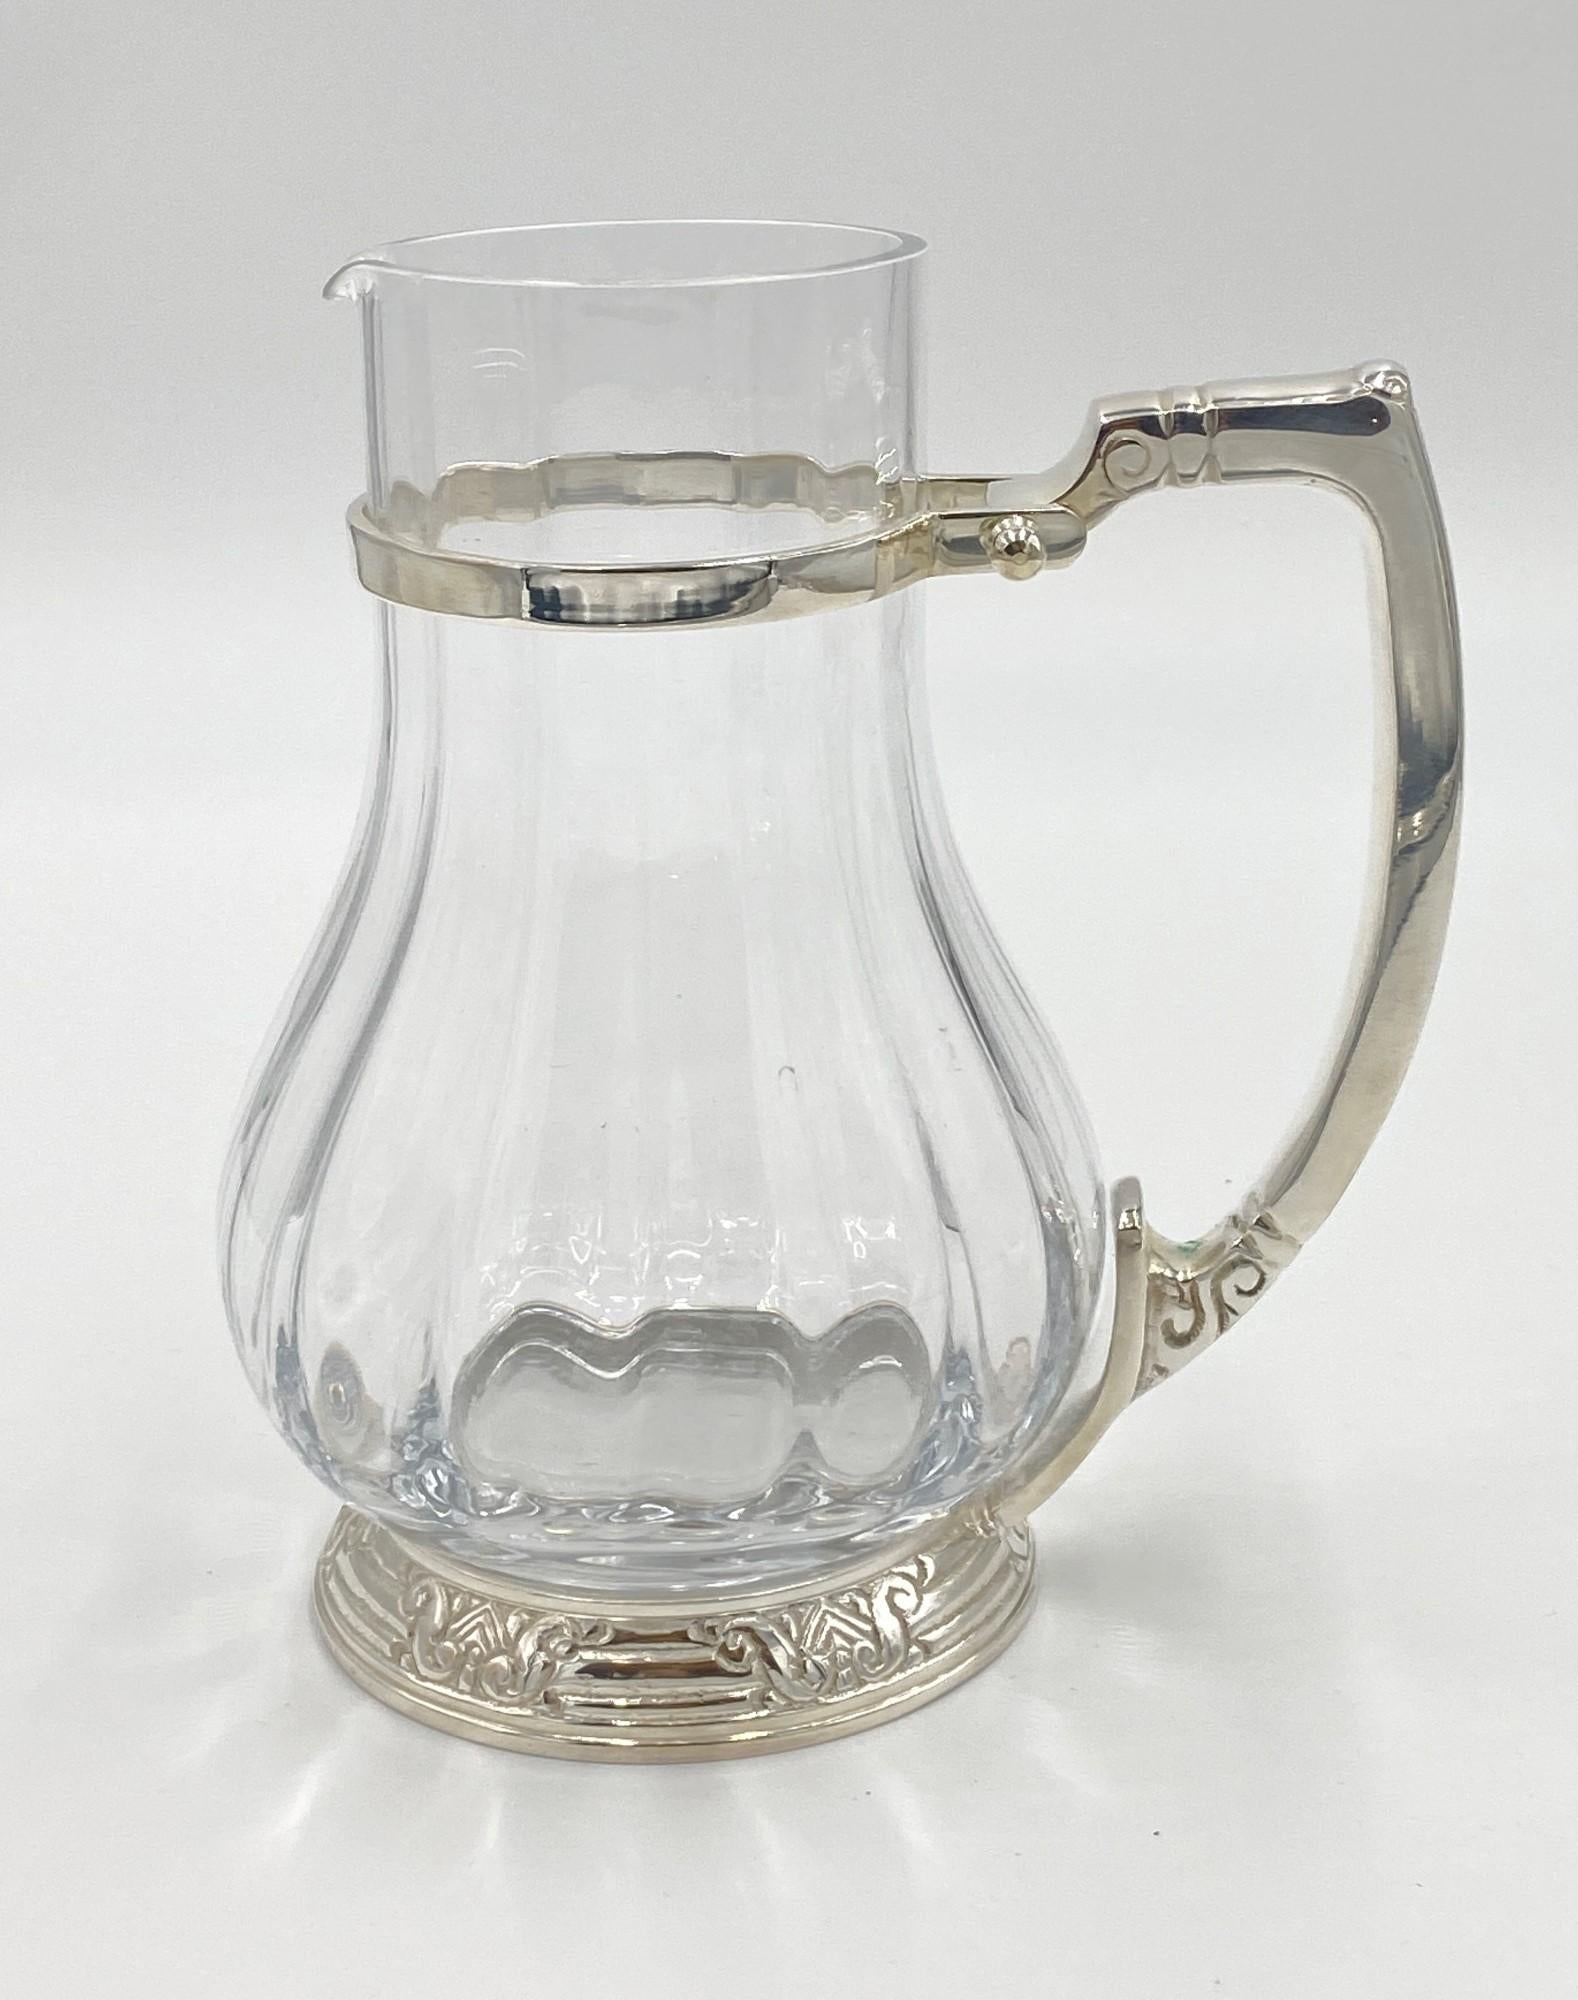 From the NYC Waldorf Astoria Hotel on Park Ave. Never used 20th century old new stock. Clear glass pitcher with the original Waldorf Astoria Art Deco styling on the silver plated frame and handle. Made by D.W. Haber and Sons. Small quantity